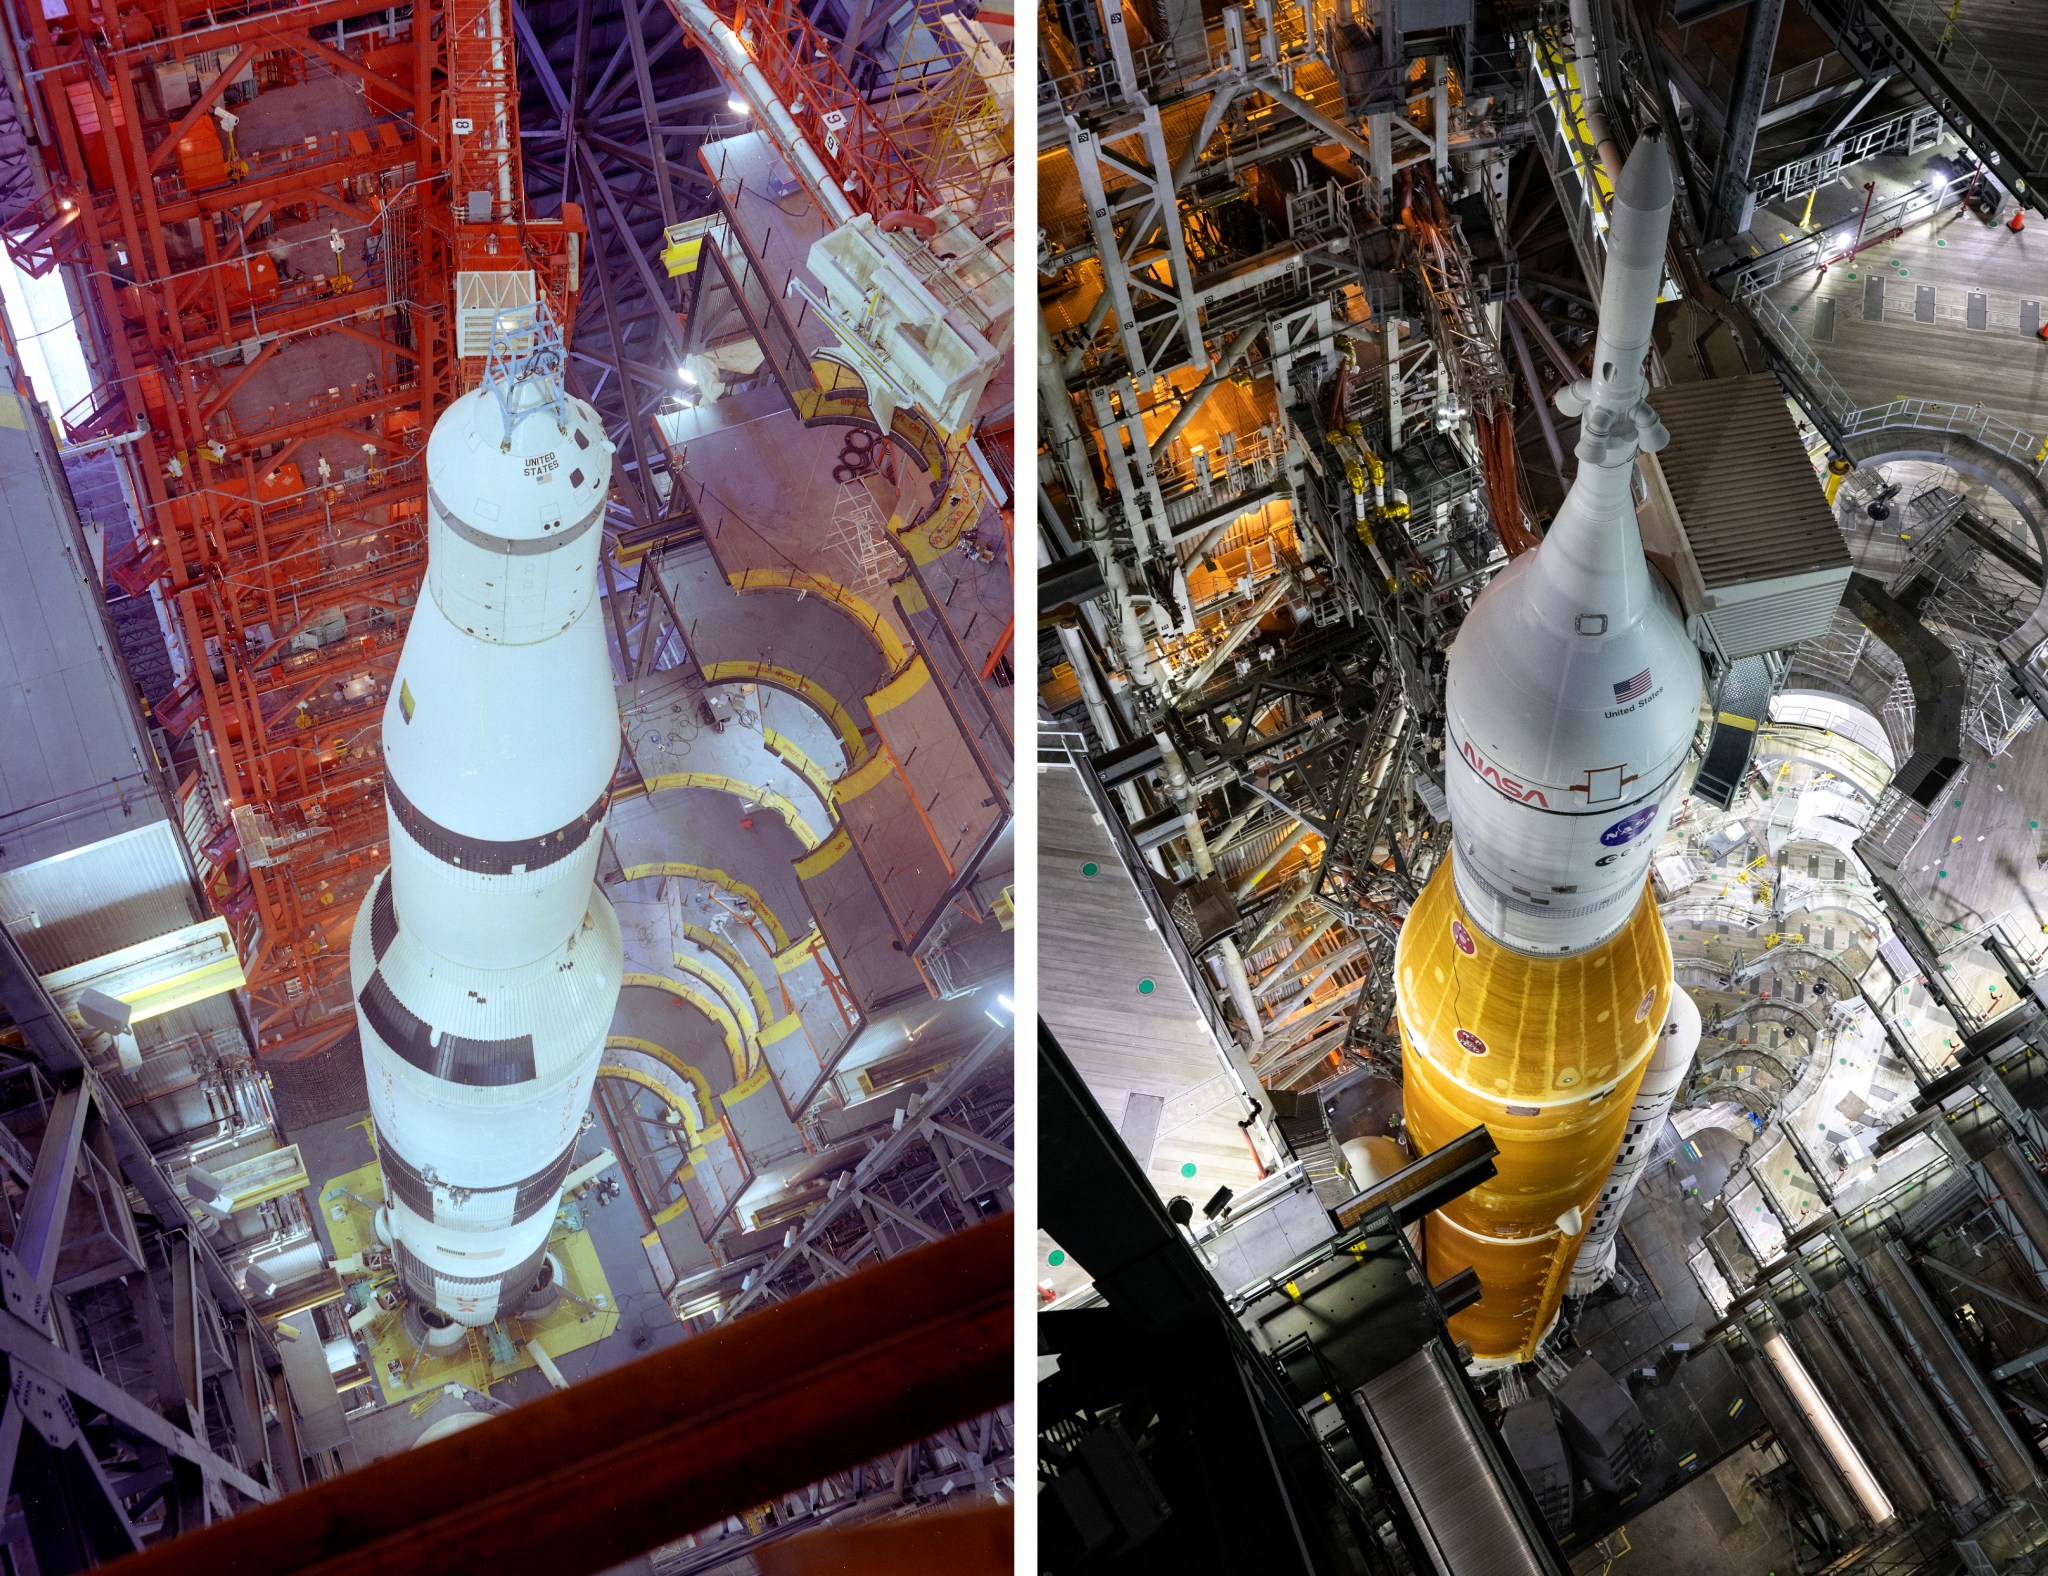 Saturn V rocket on the left, Space Launch System and Orion spacecraft on the right.